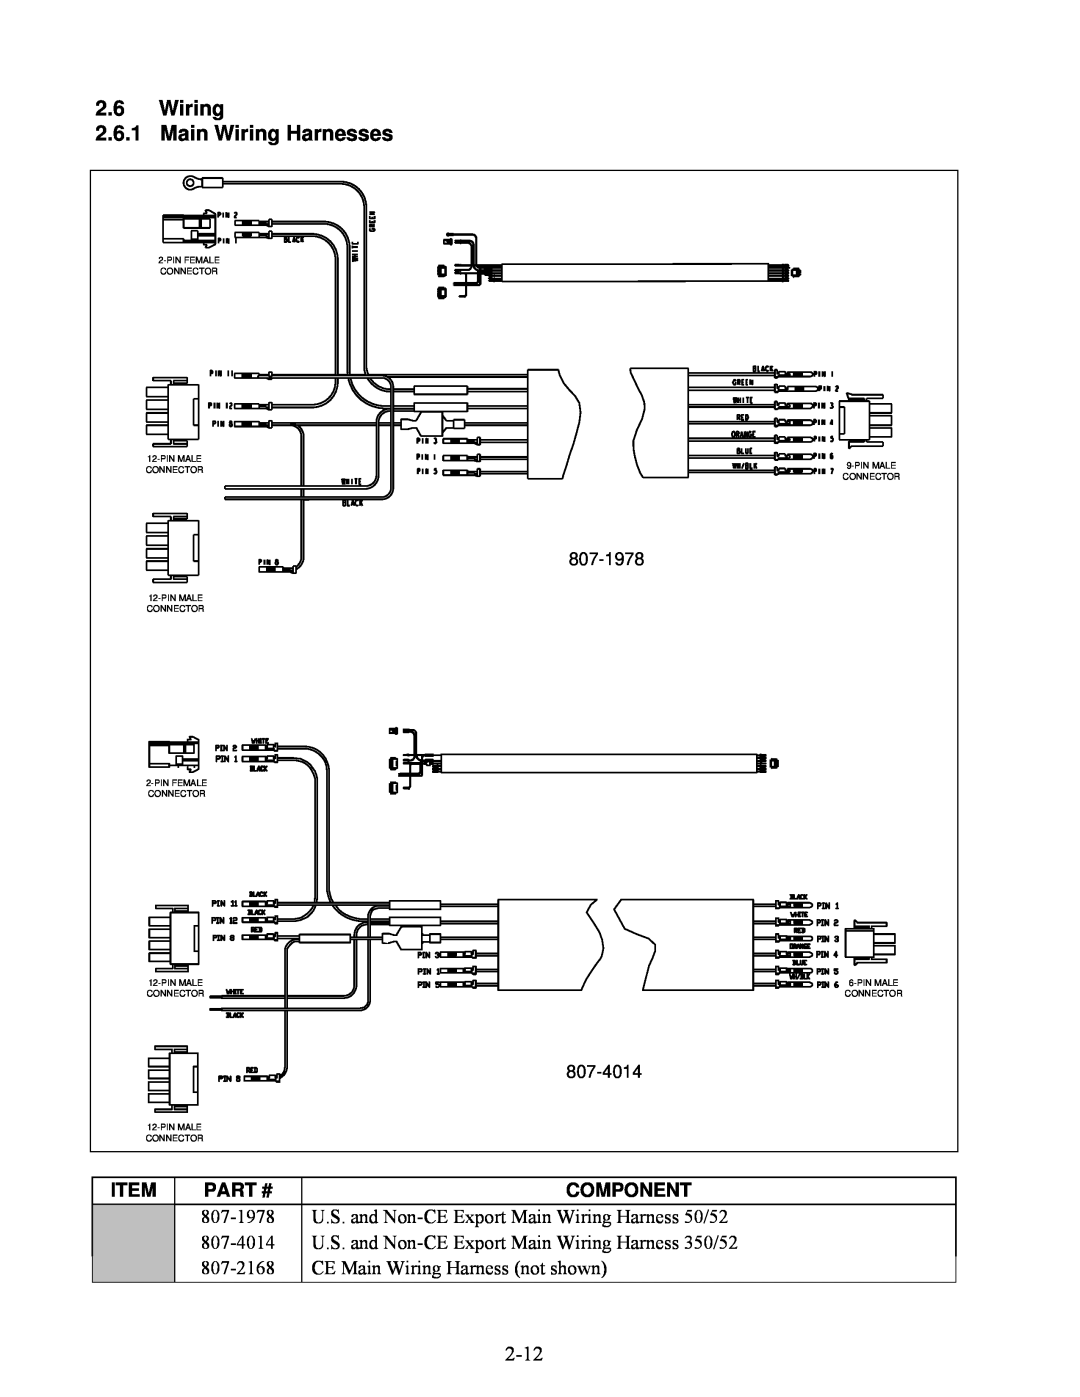 Frymaster 8196345 manual 2.6Wiring 2.6.1 Main Wiring Harnesses, 807-1978, 807-4014, Pinfemale, Connector, Pinmale 